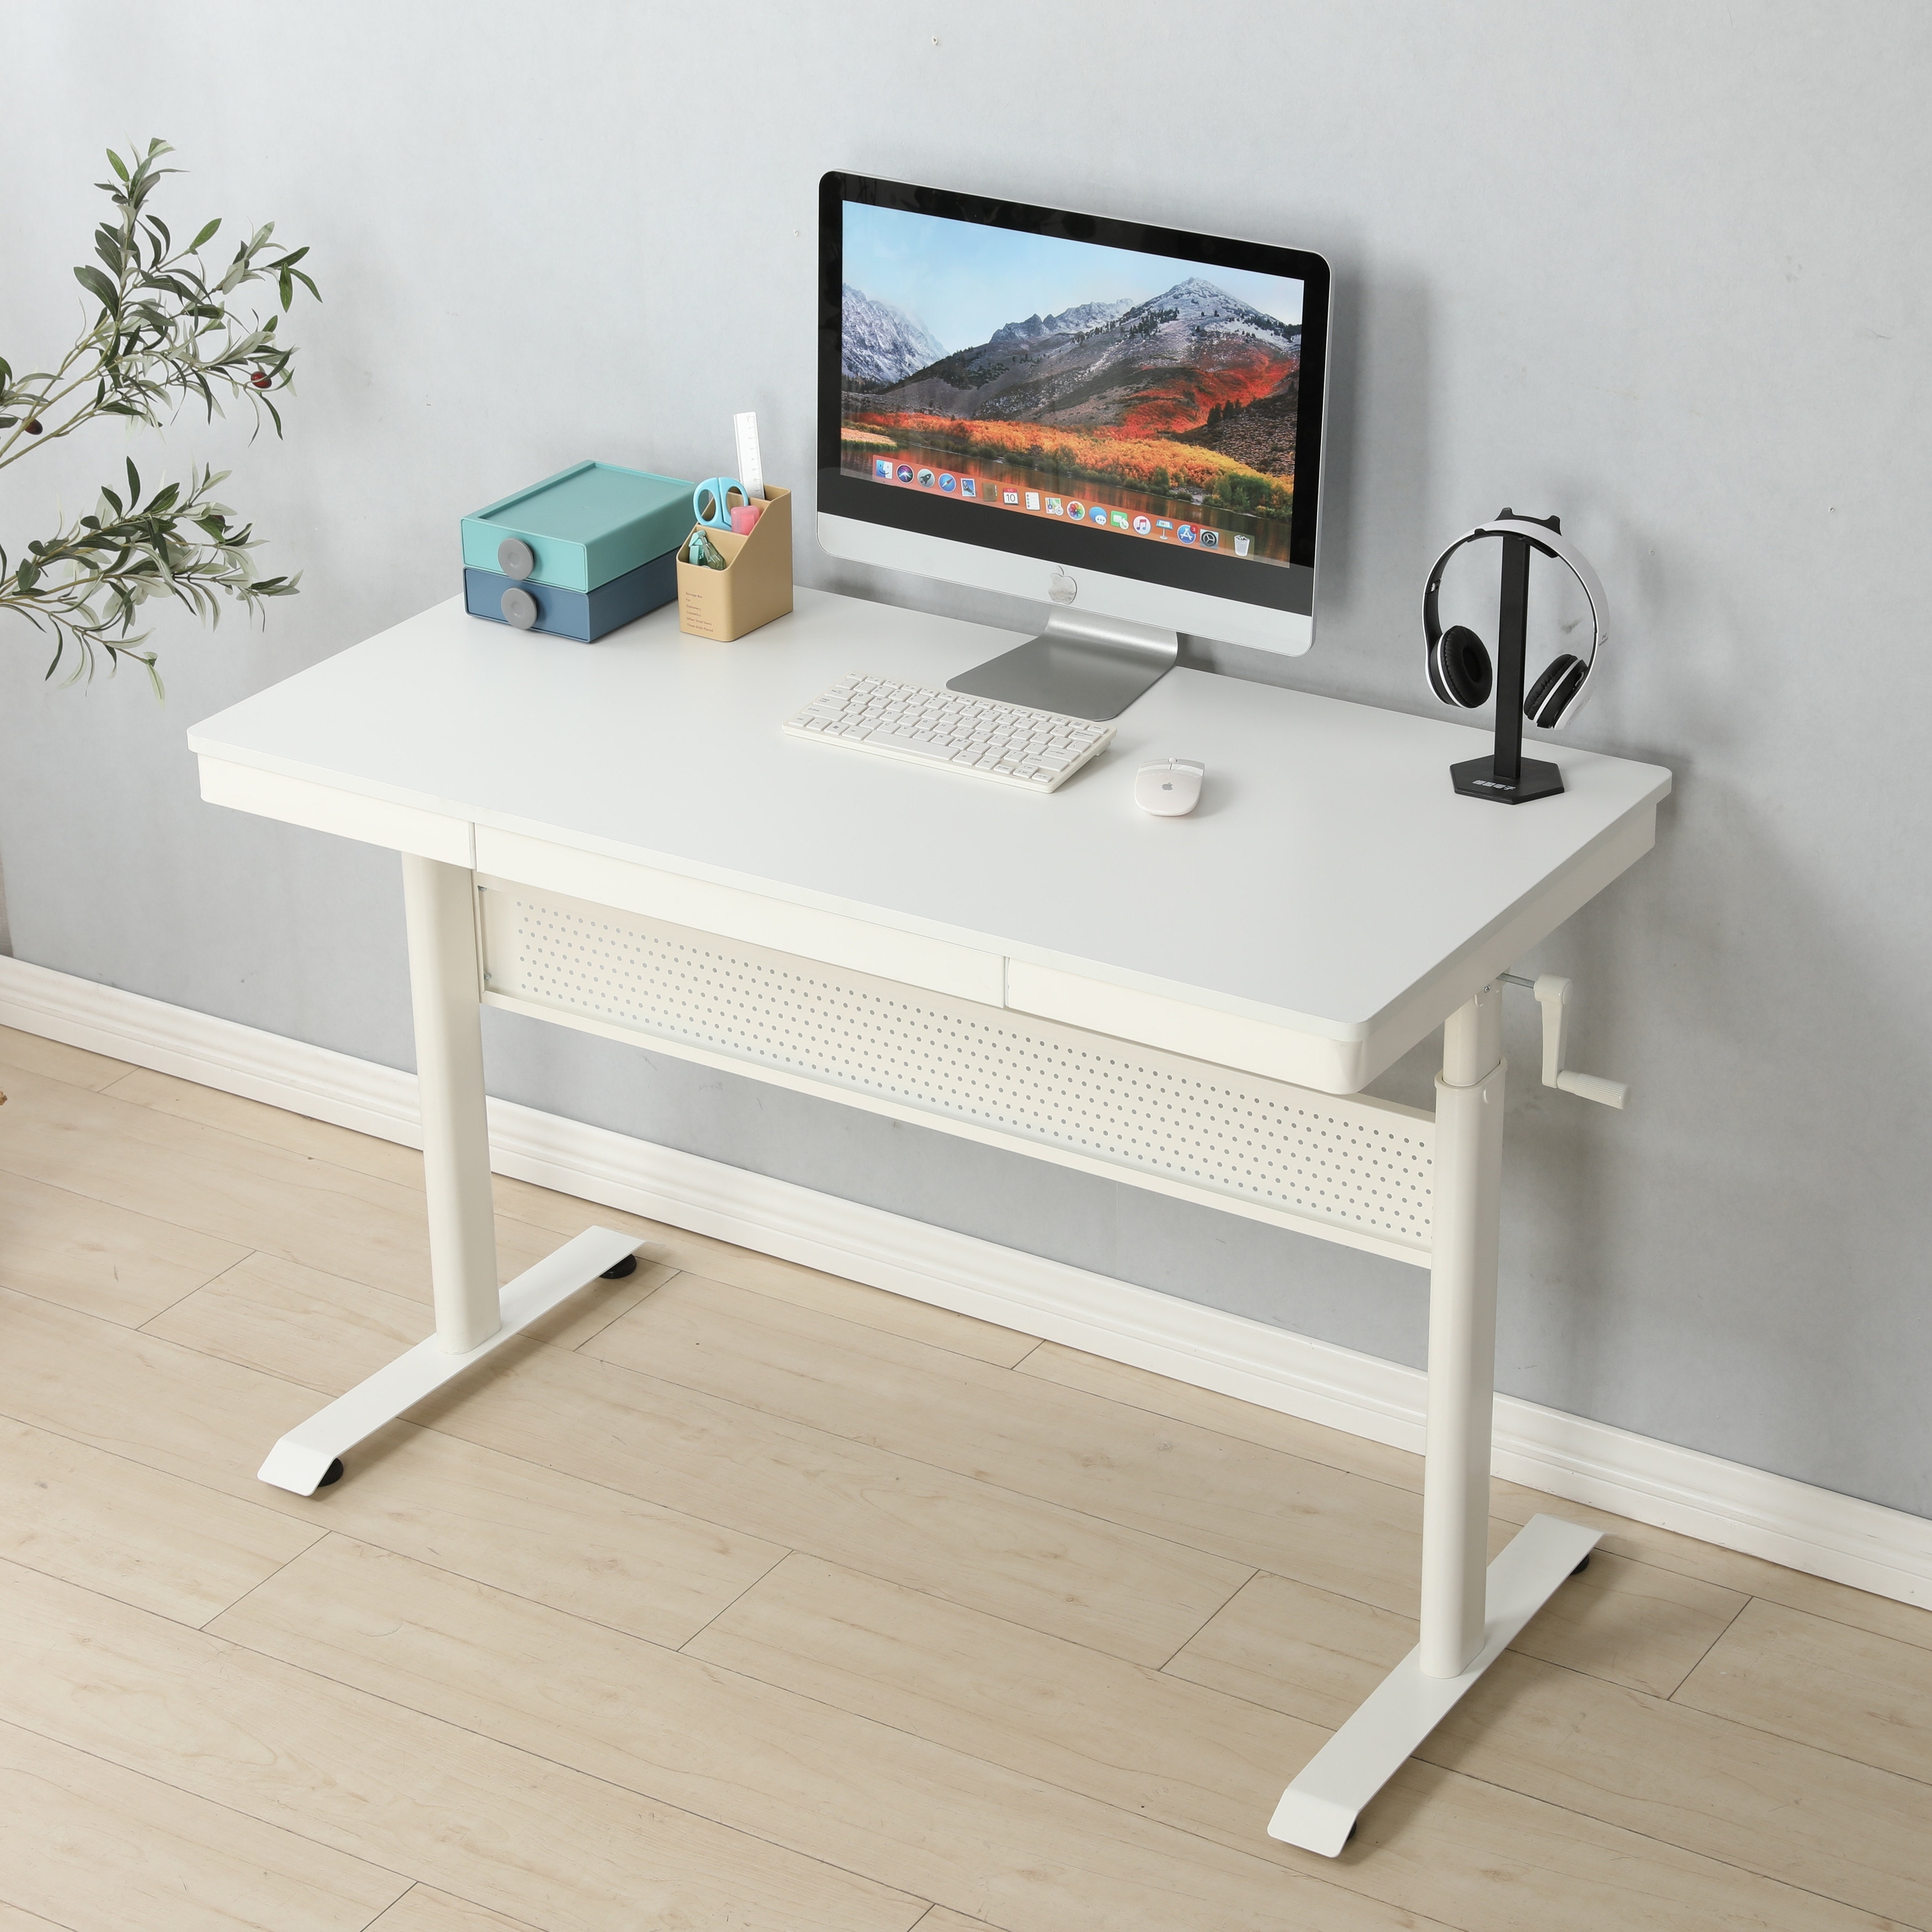 Tempered Glass Standing Desk with Metal Drawer, Adjustable Height Stand up Desk, Sit Stand Home Office Desk